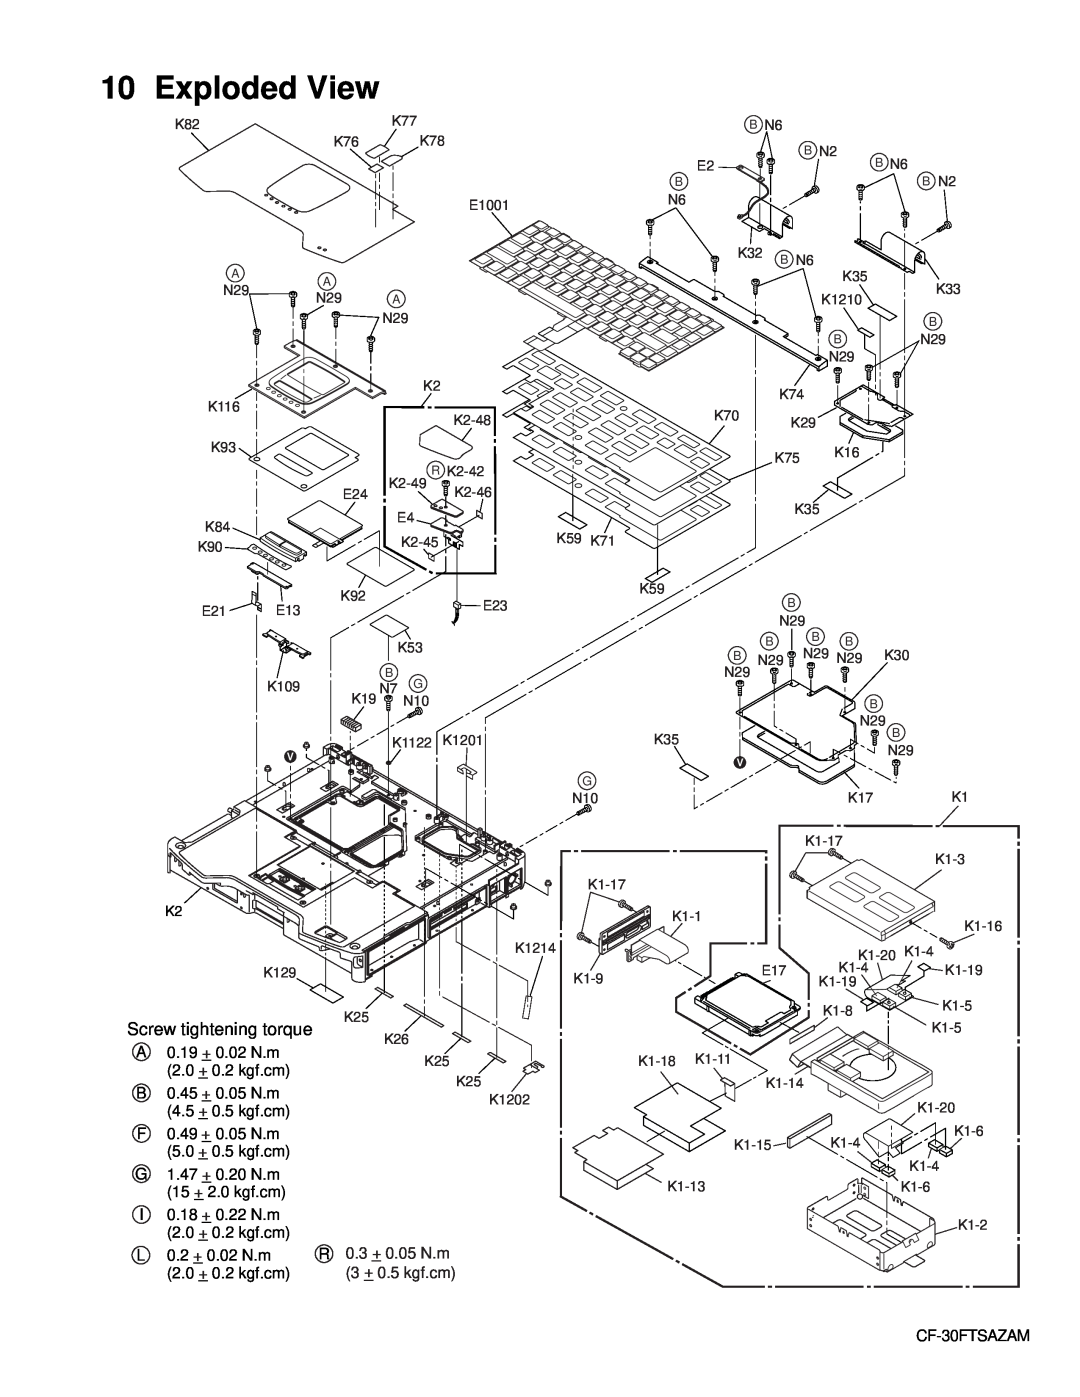 Philips CF-30FTSAZAM service manual Exploded View, Screw tightening torque 